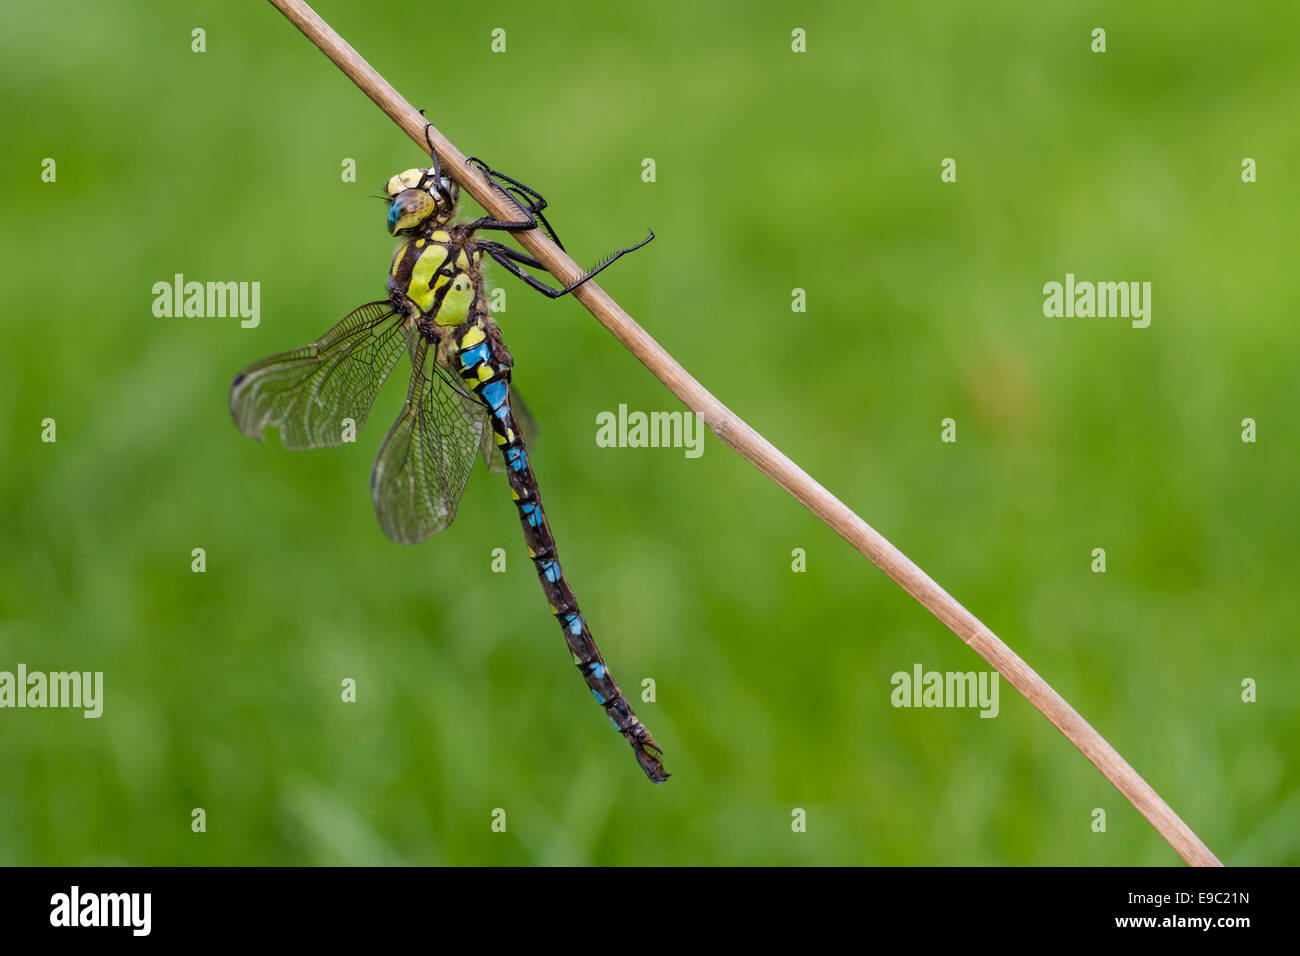 Southern Hawker Dragonfly, Macro on plant stem Stock Photo